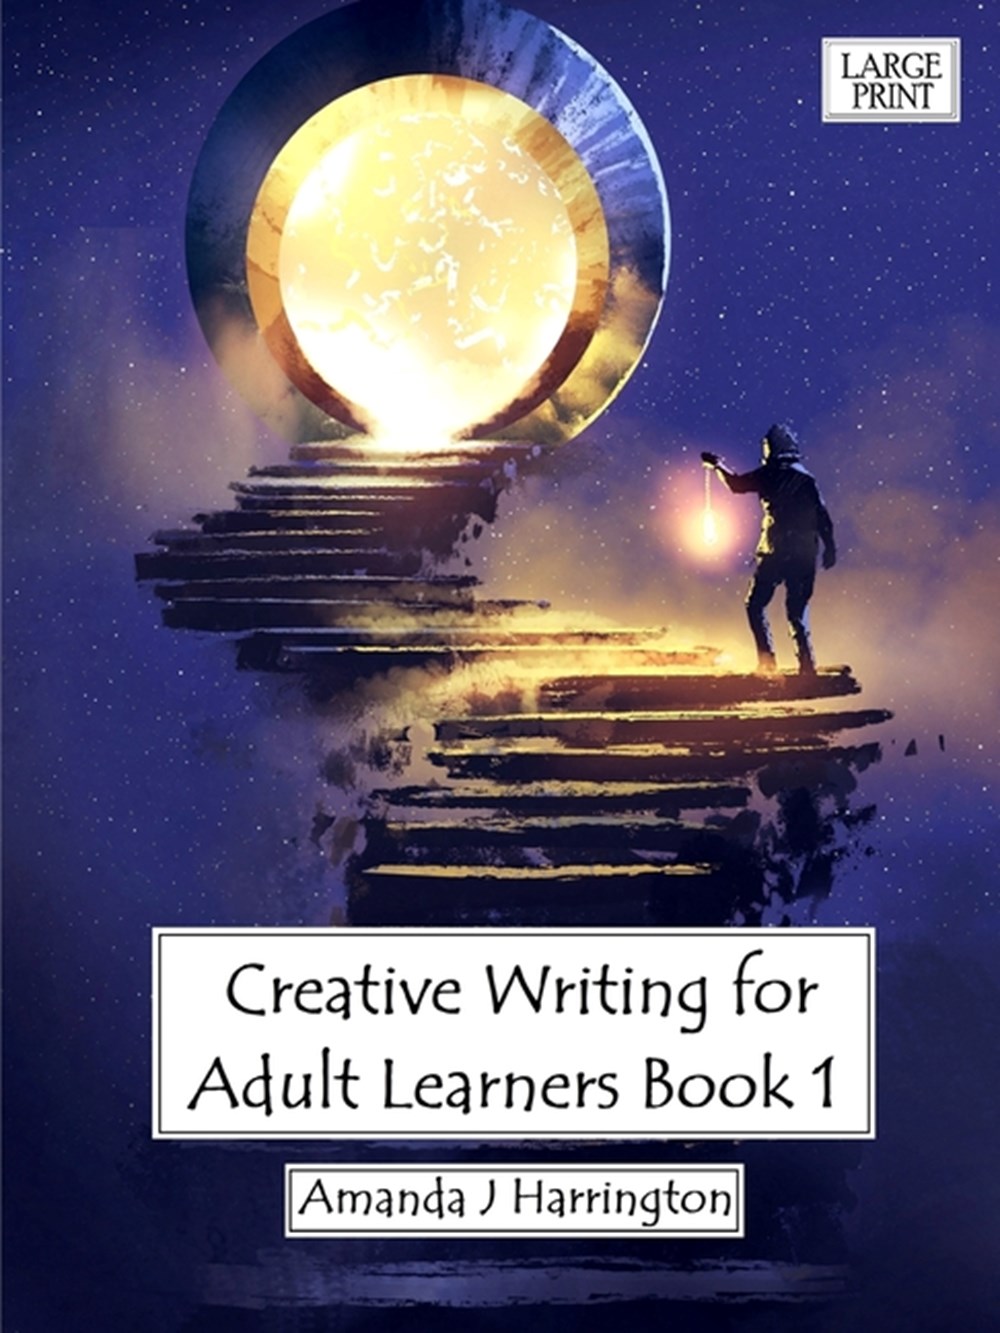 topics for creative writing for adults